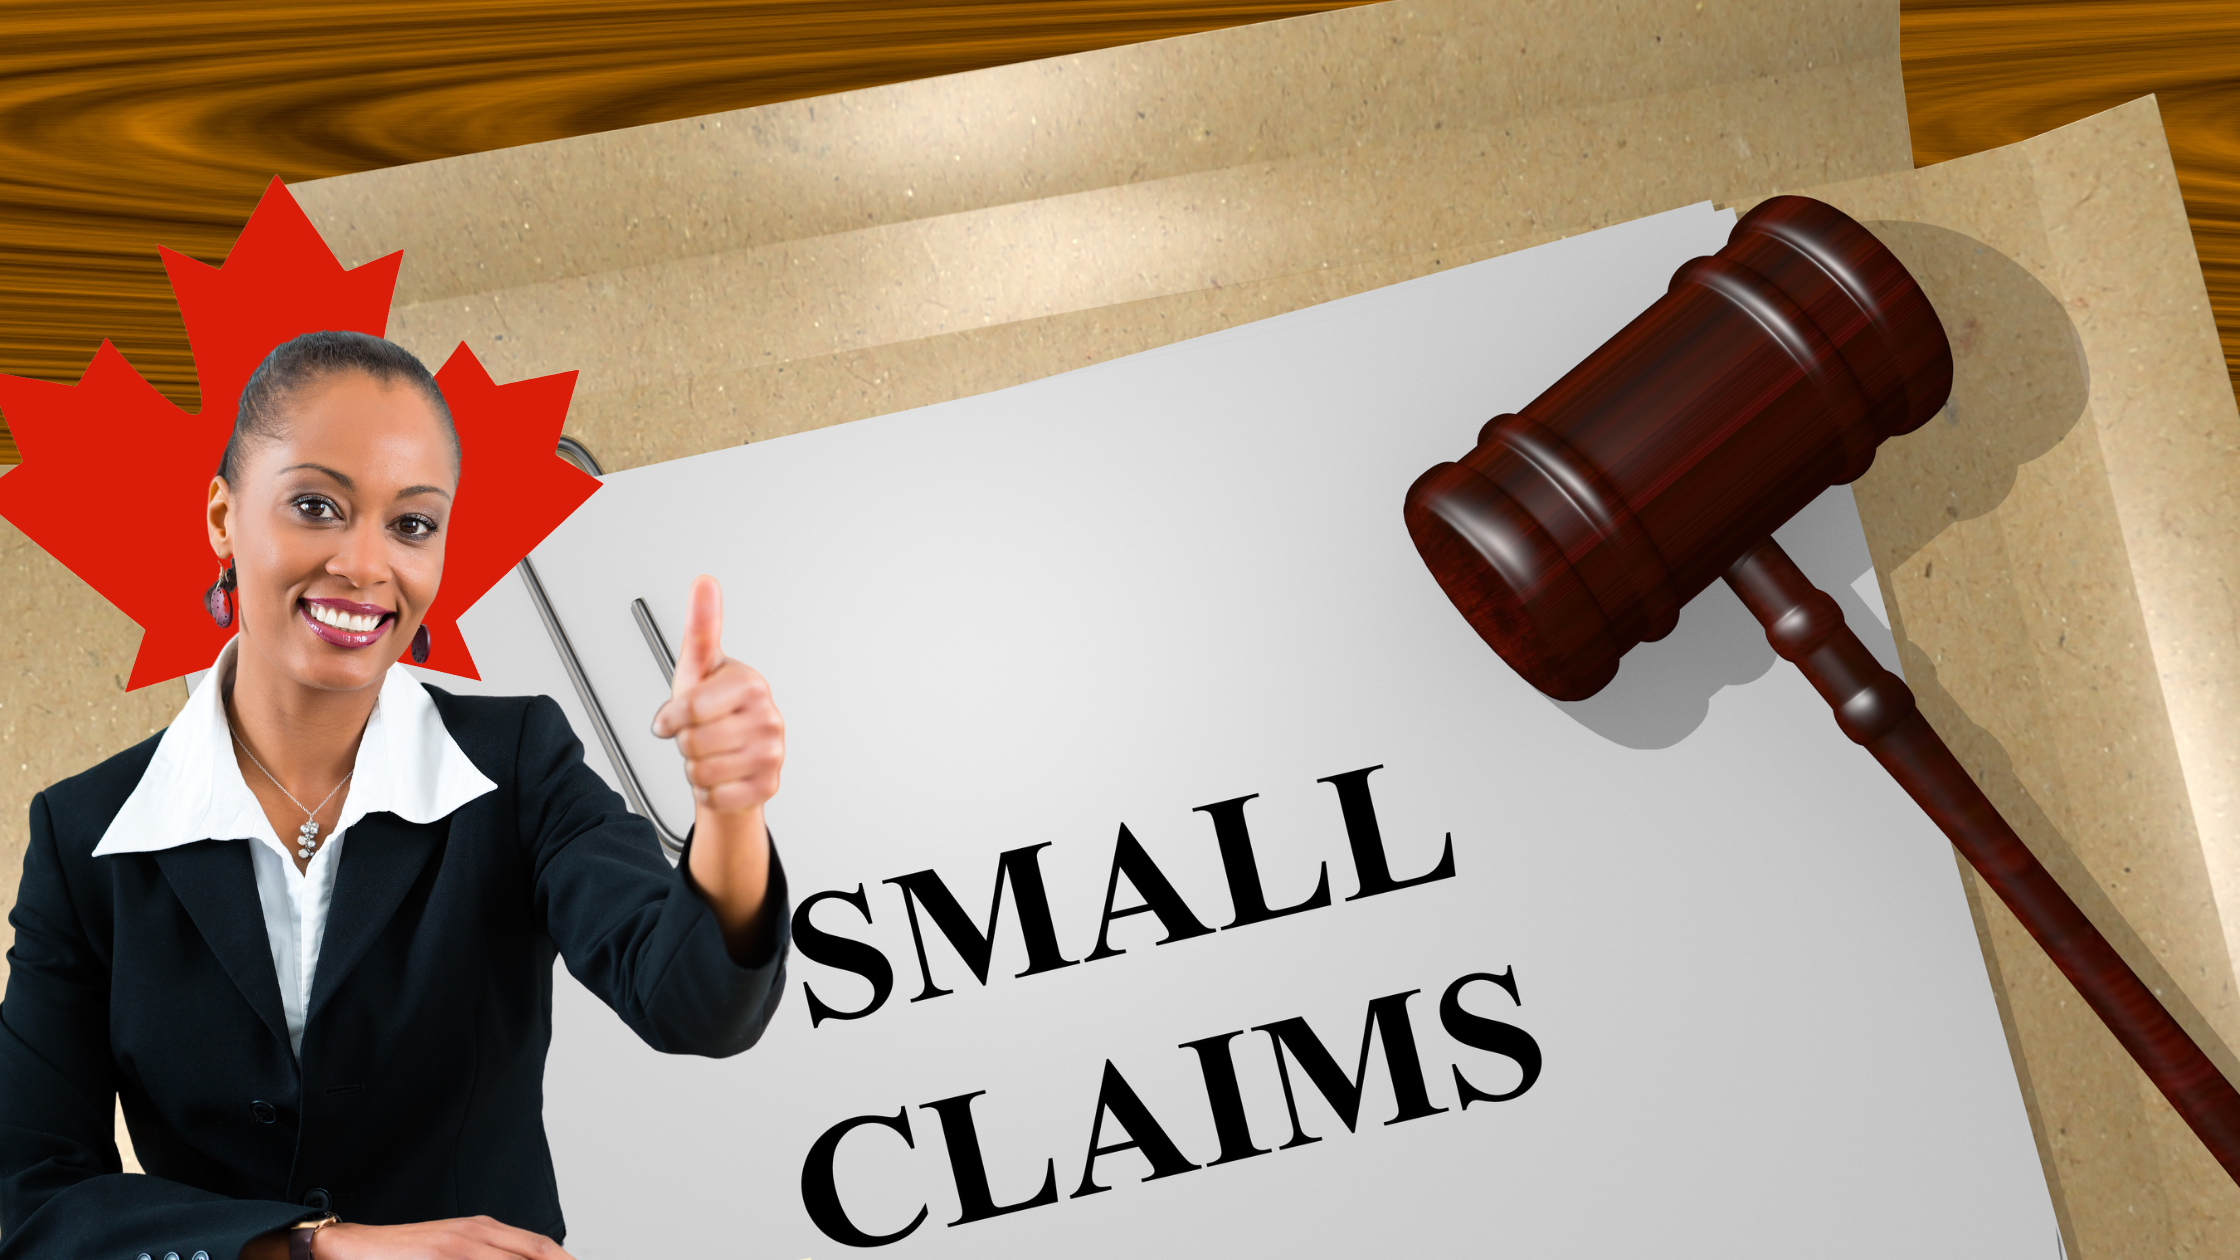 small claims Toronto paralegal